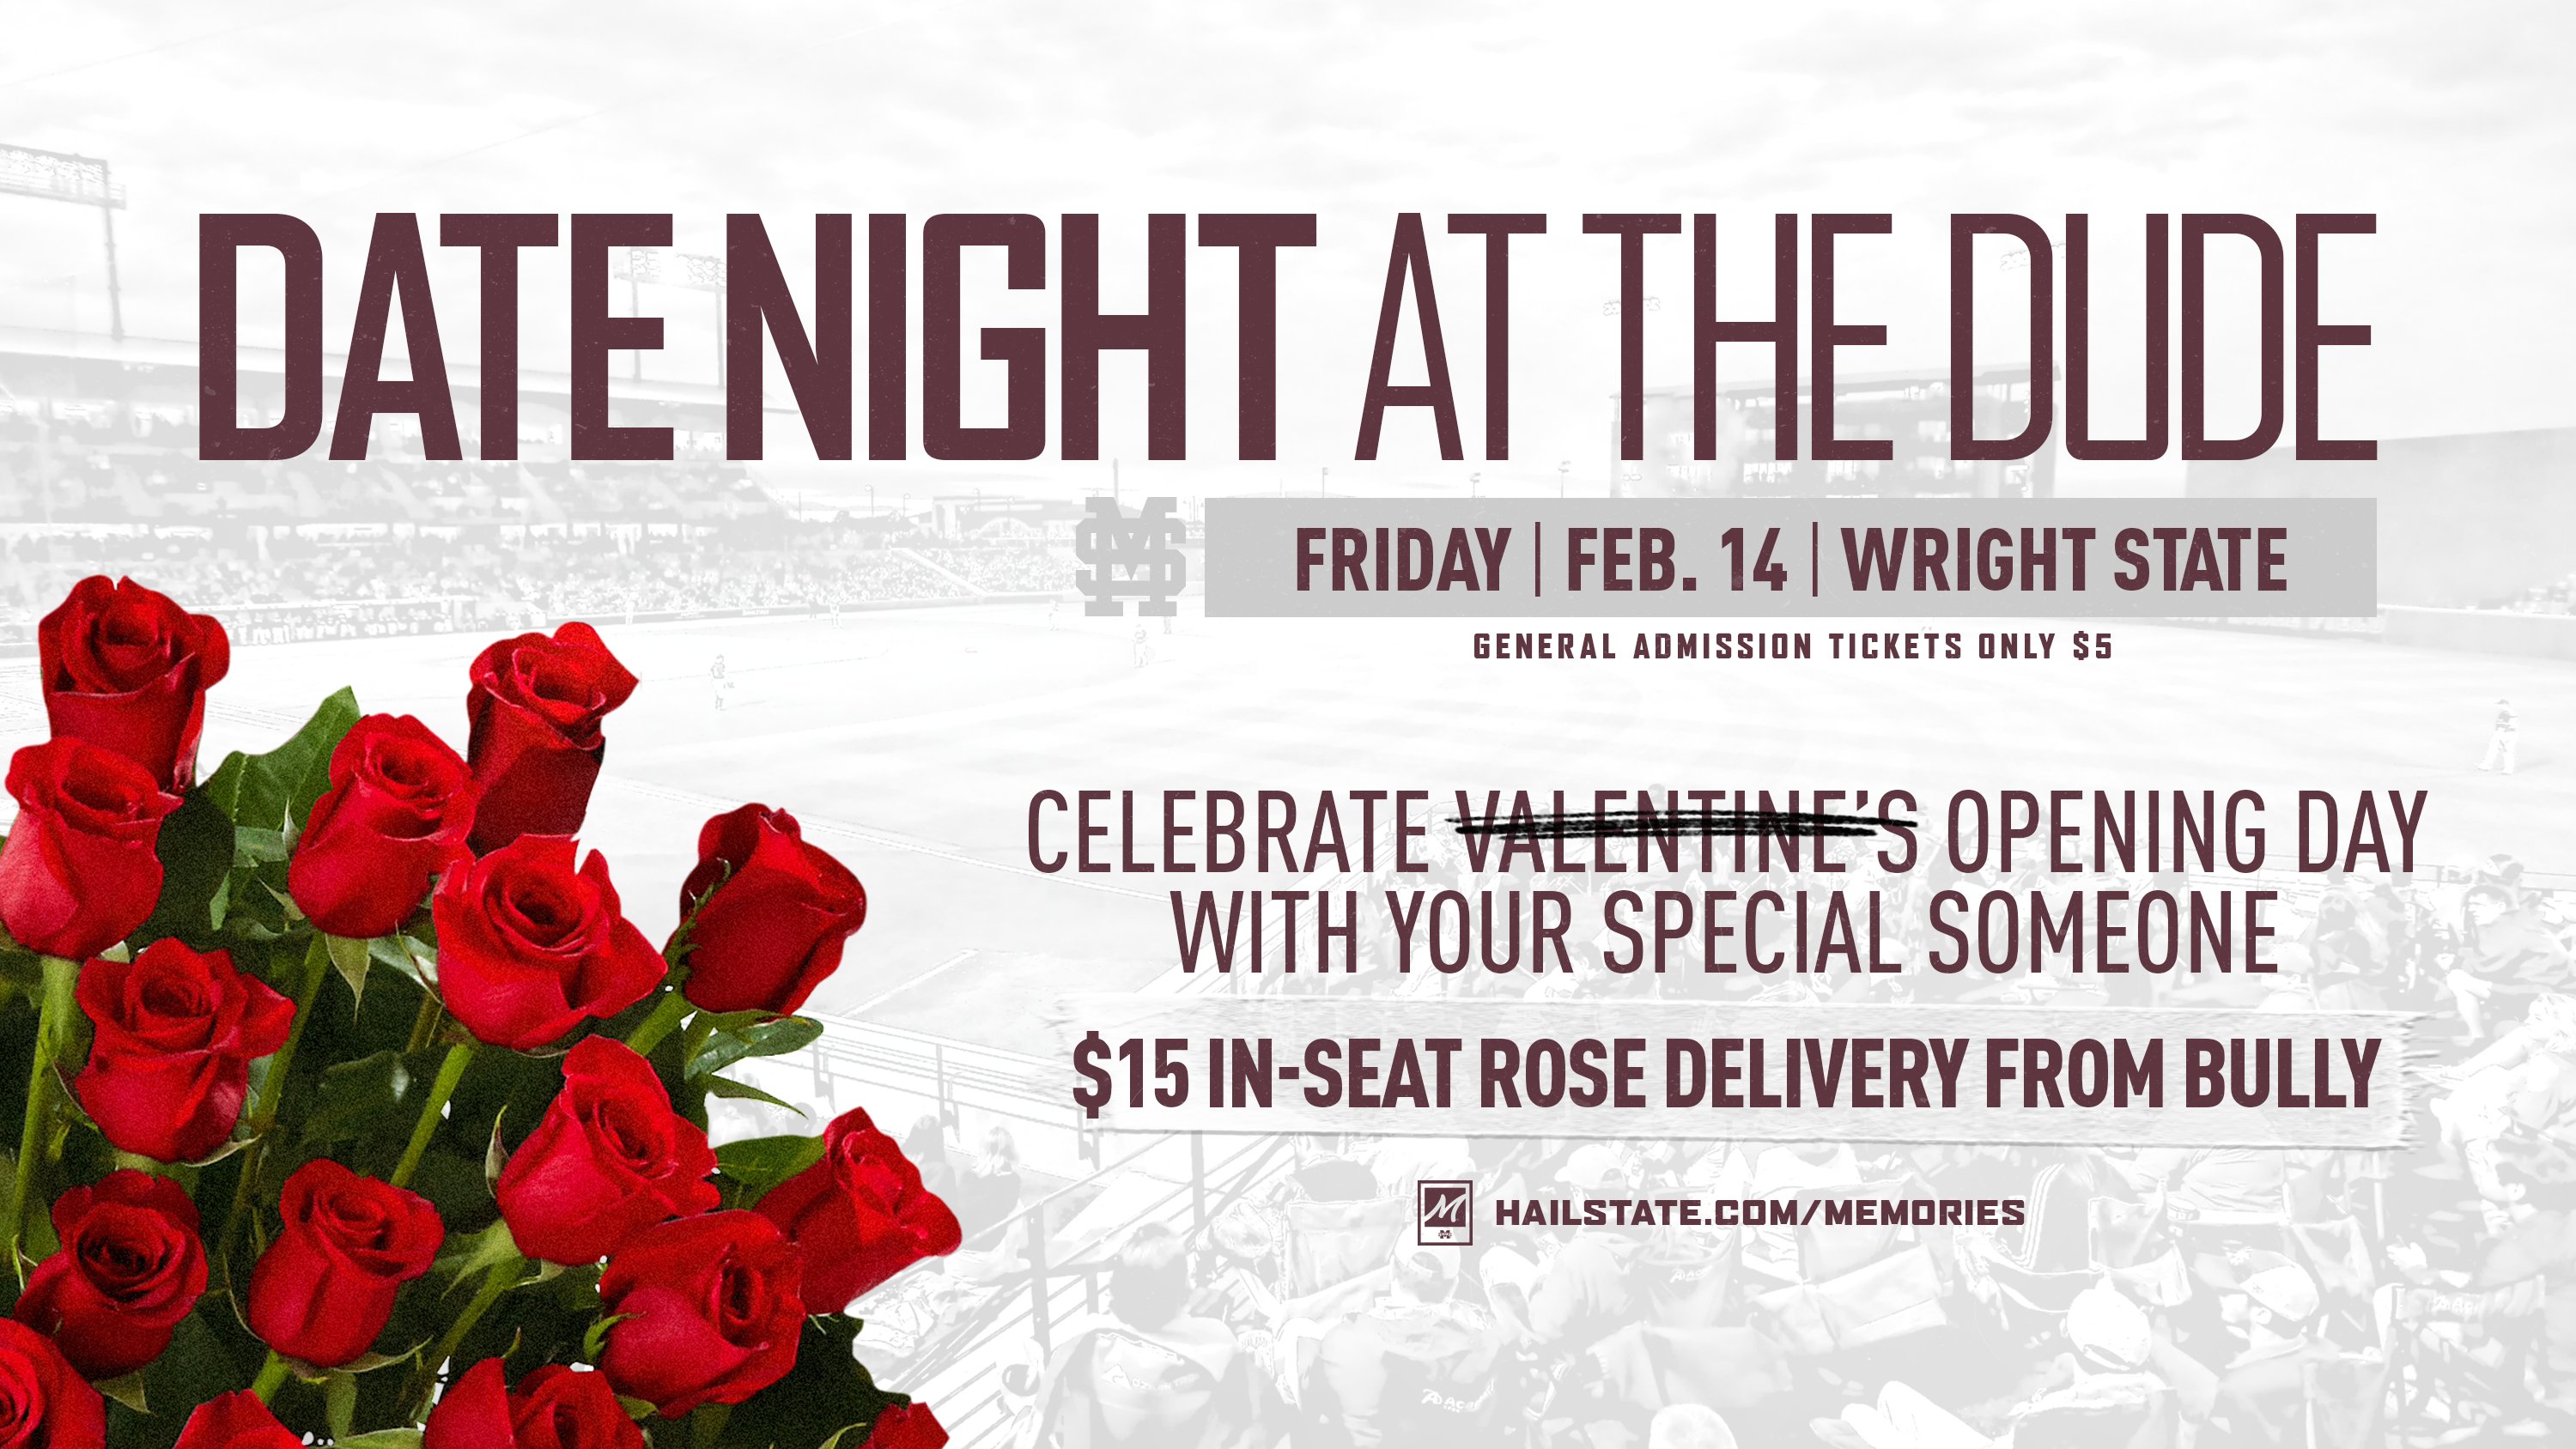 Promotional graphic for "Date Night at the Dude"